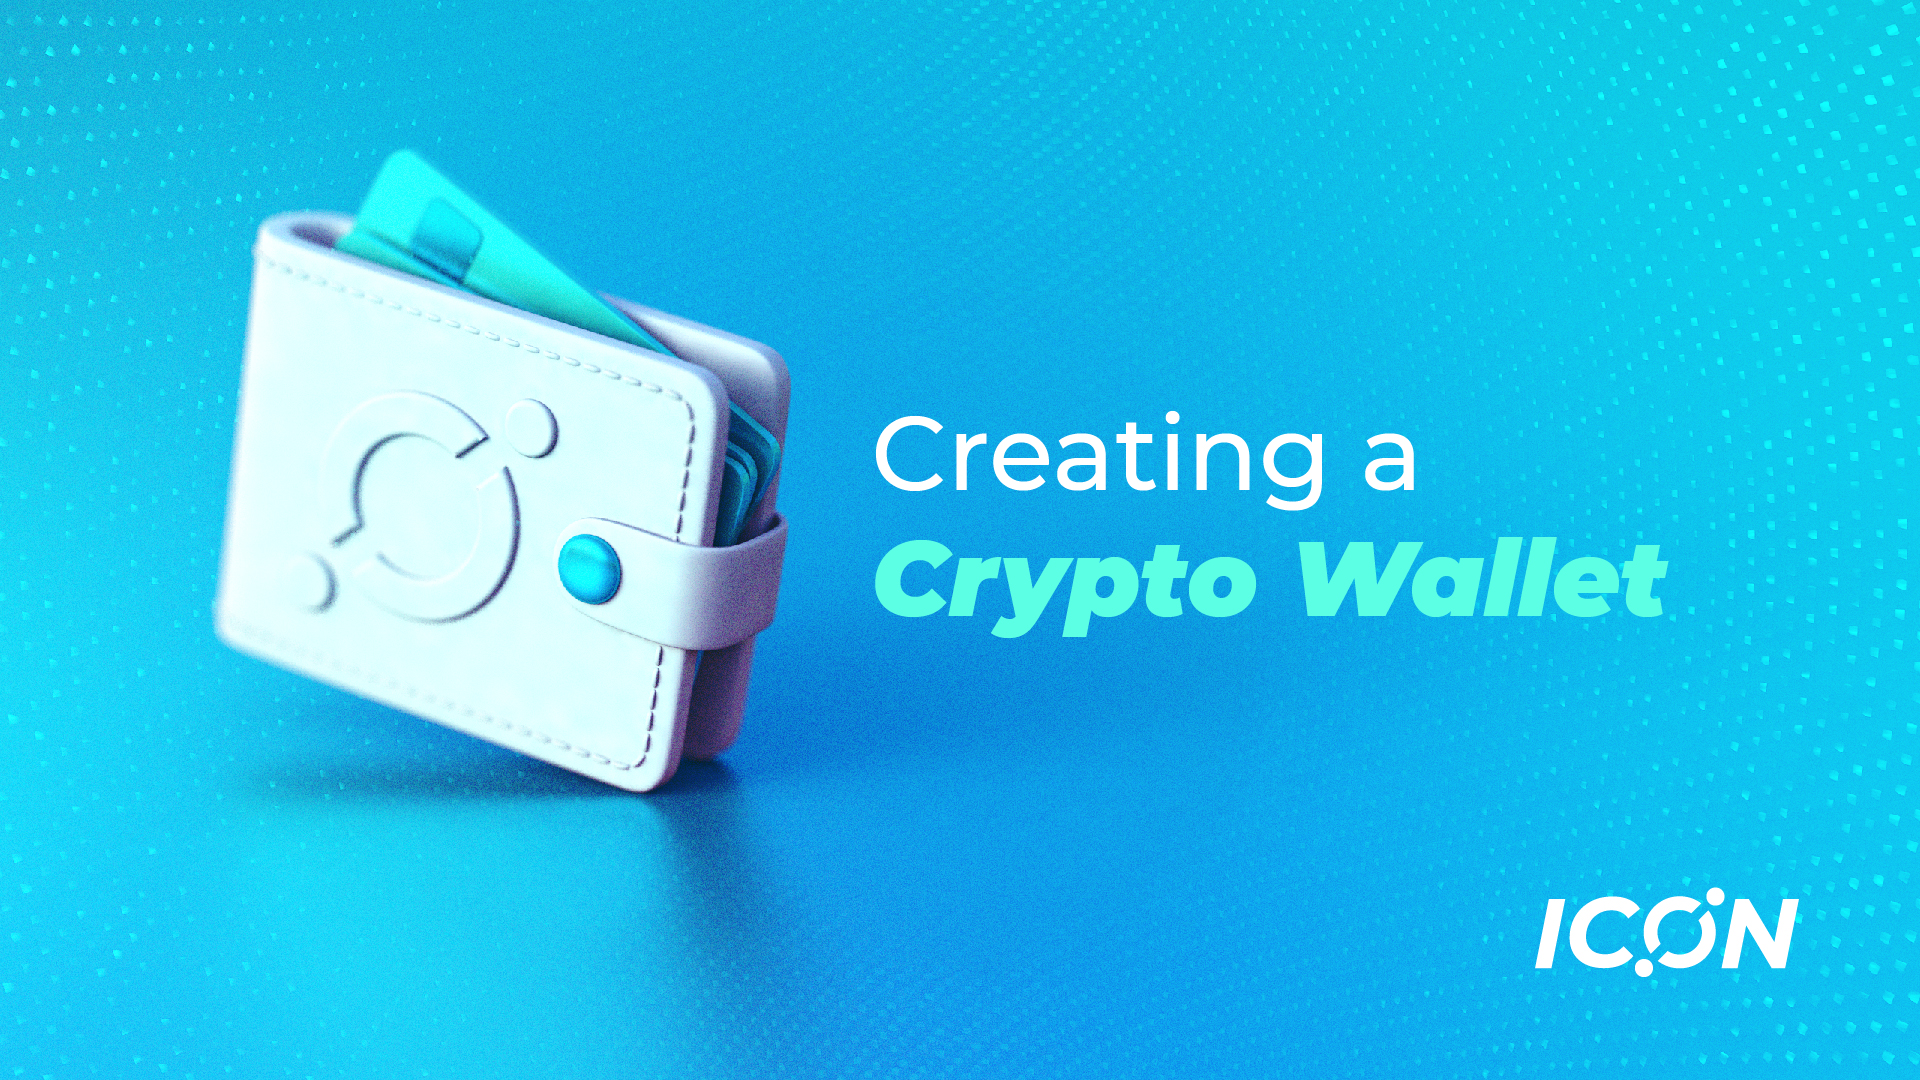 Creating an anonymous crypto wallet is easy, because self-custody blockchain wallets do not require KYC verification.